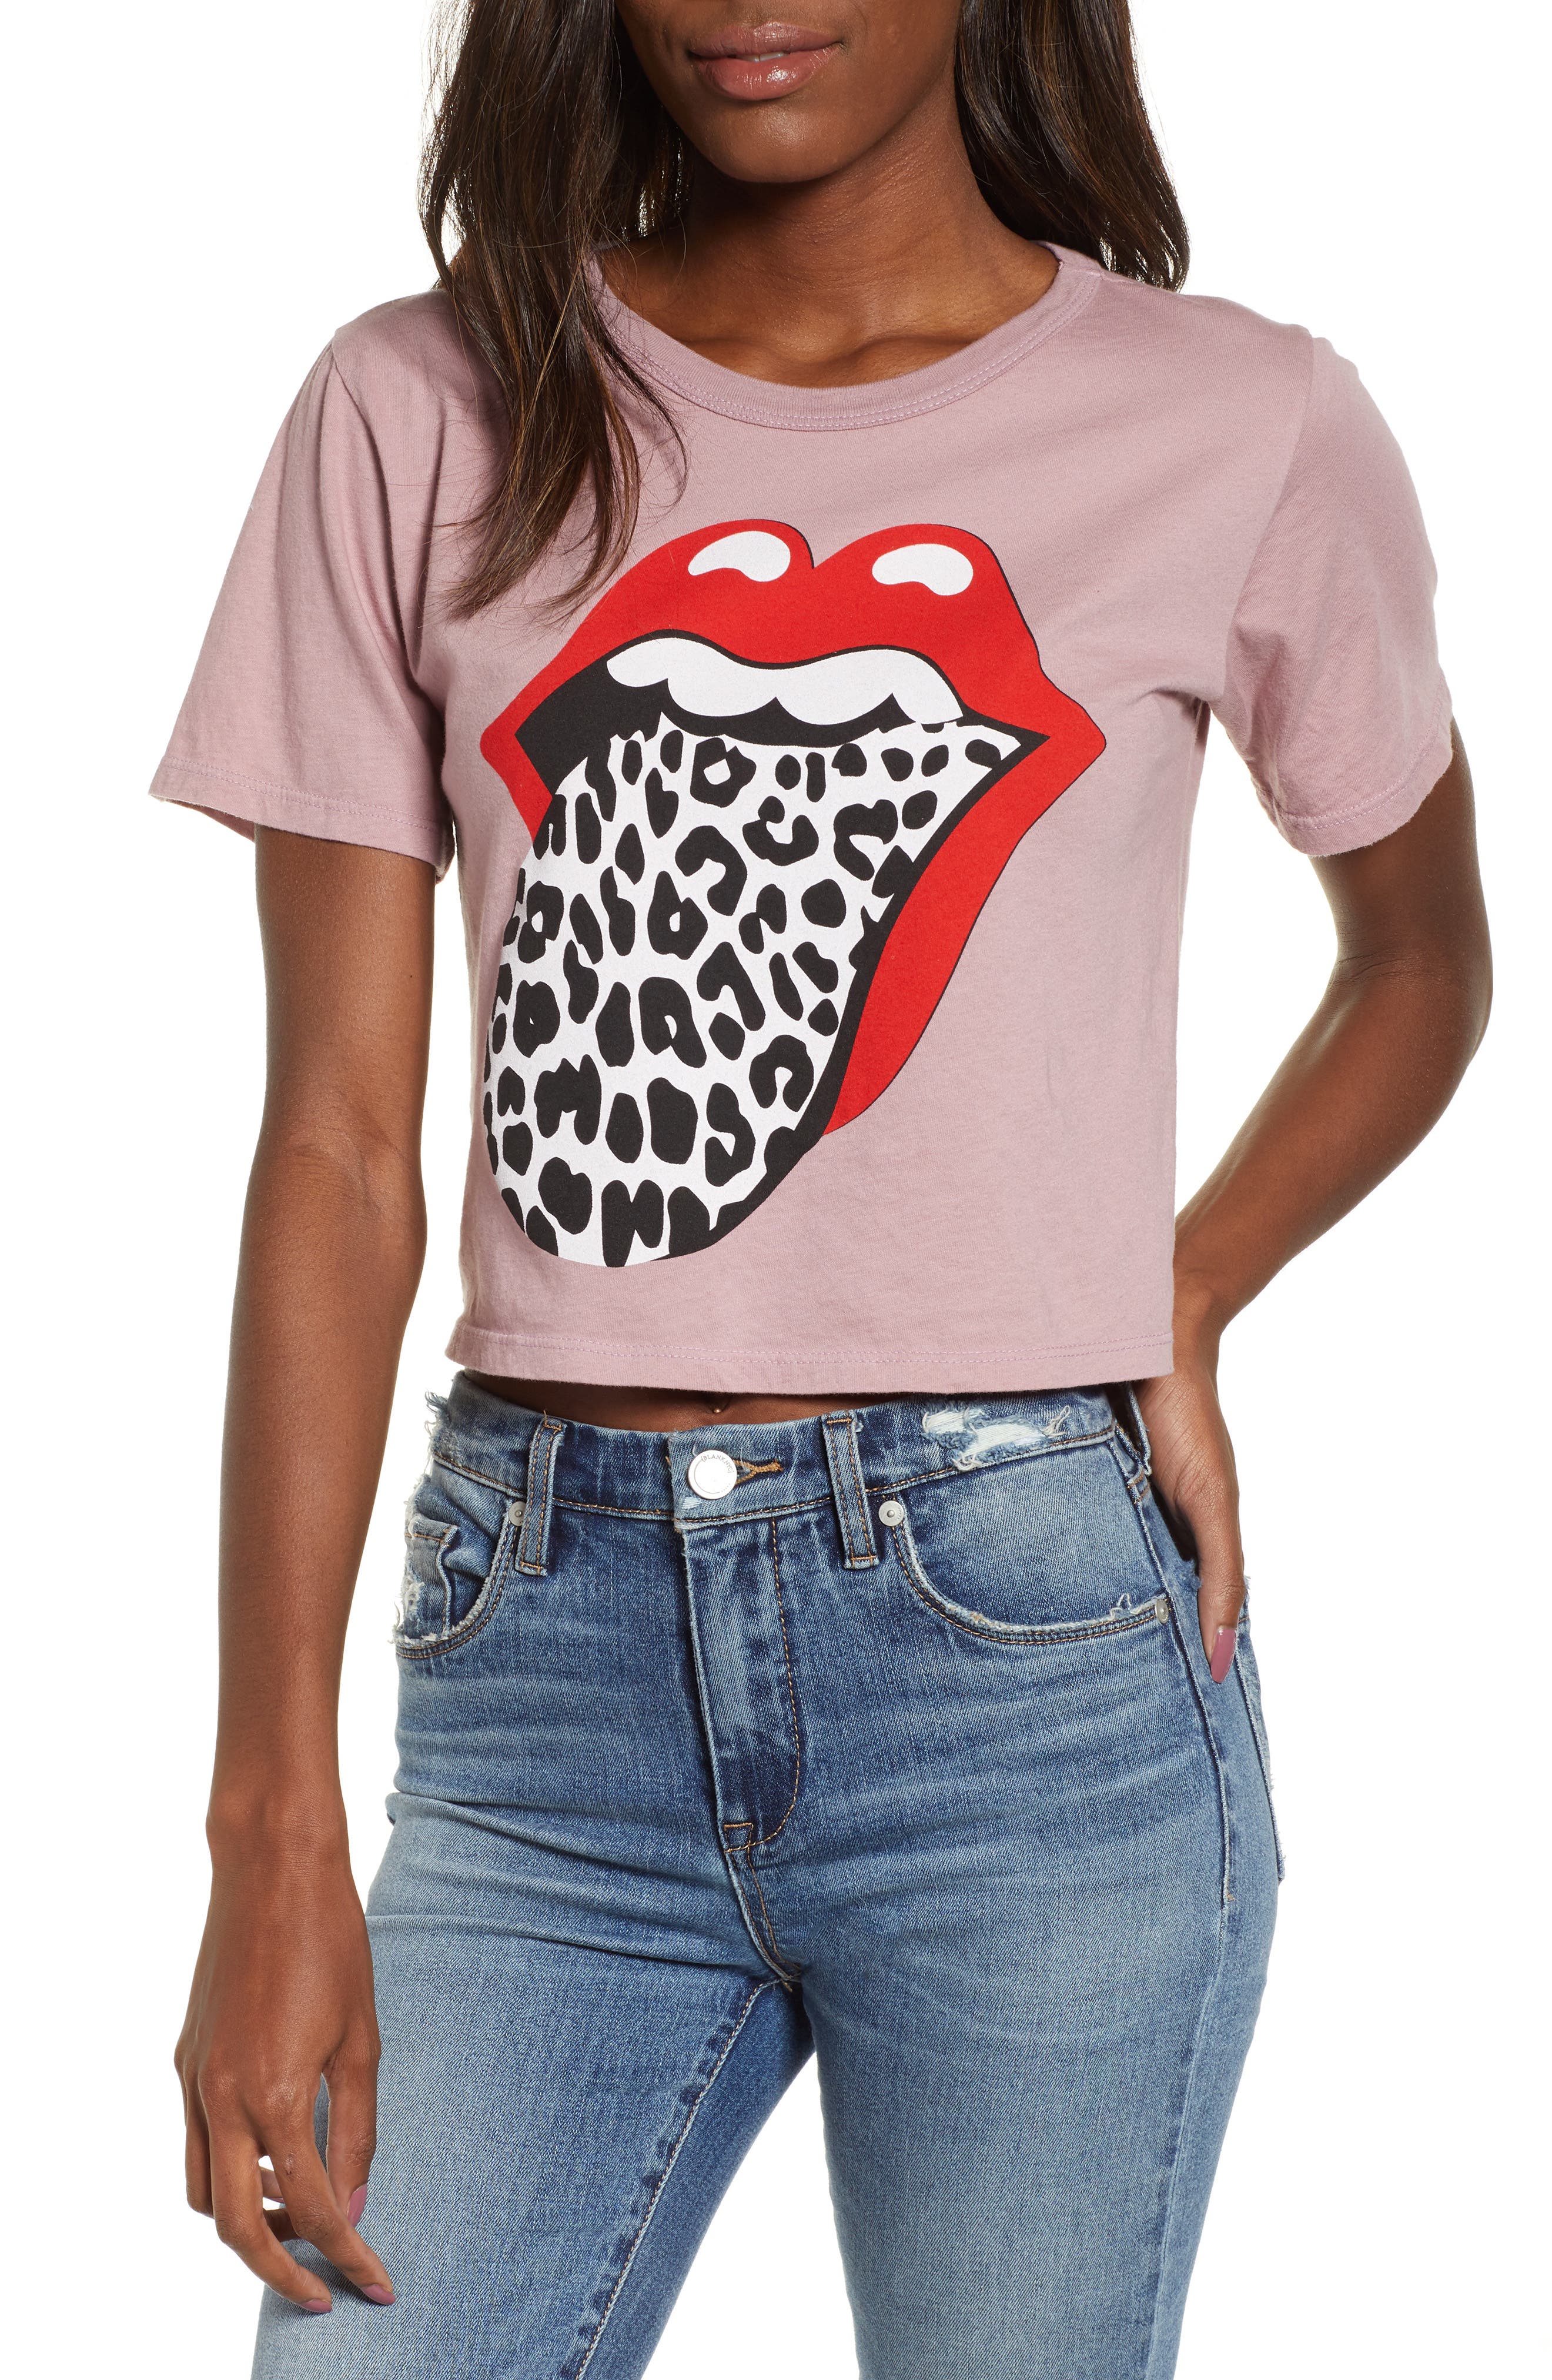 lips shirt with leopard tongue